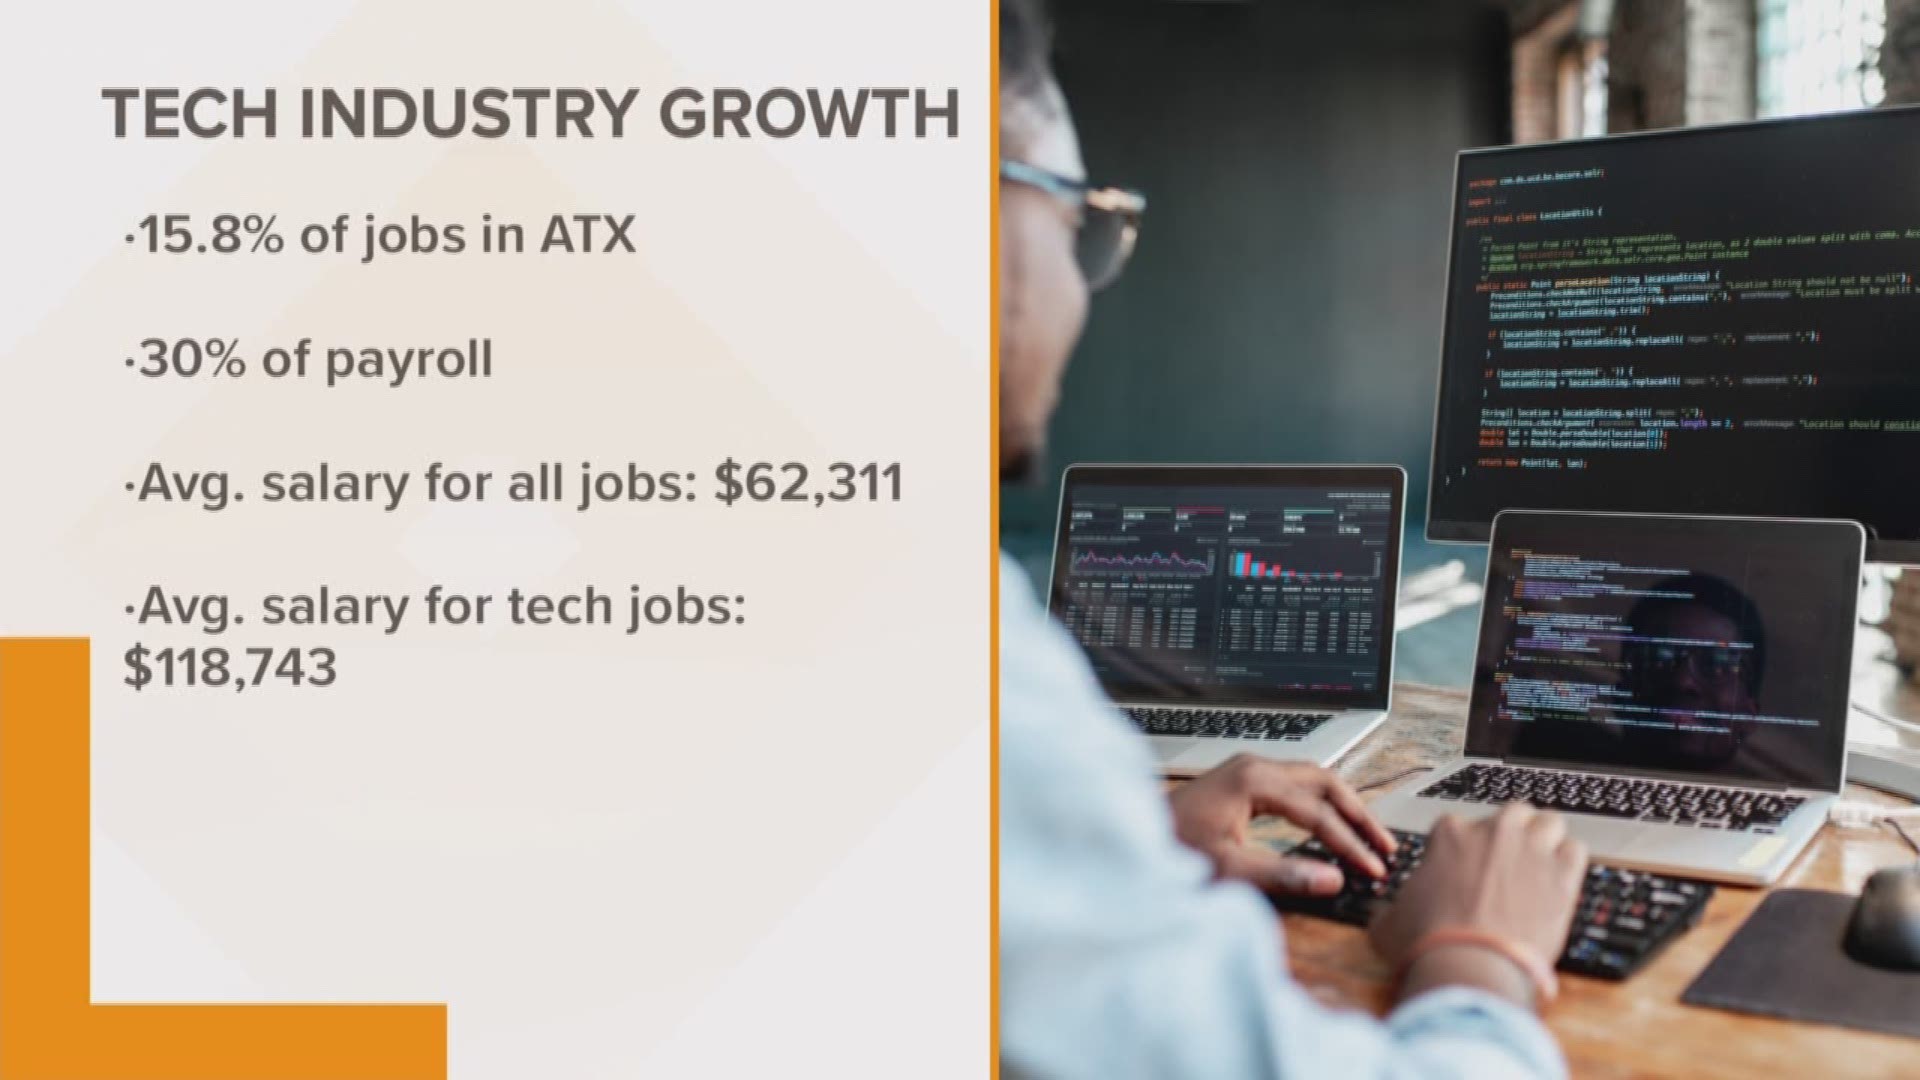 A new study found tech jobs account for almost 16% of Austin's jobs.